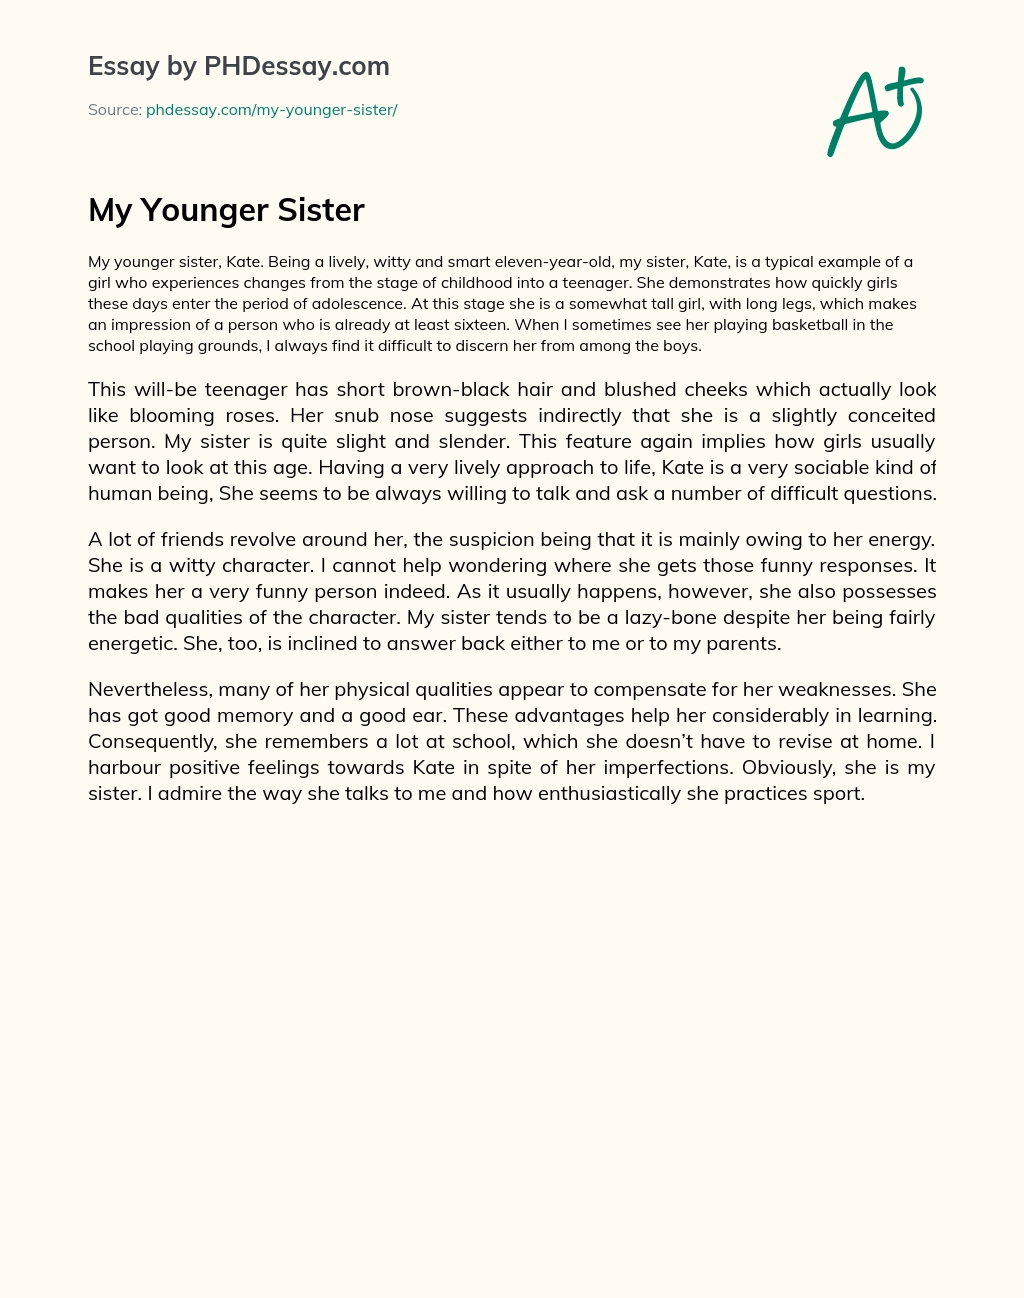 My Younger Sister essay